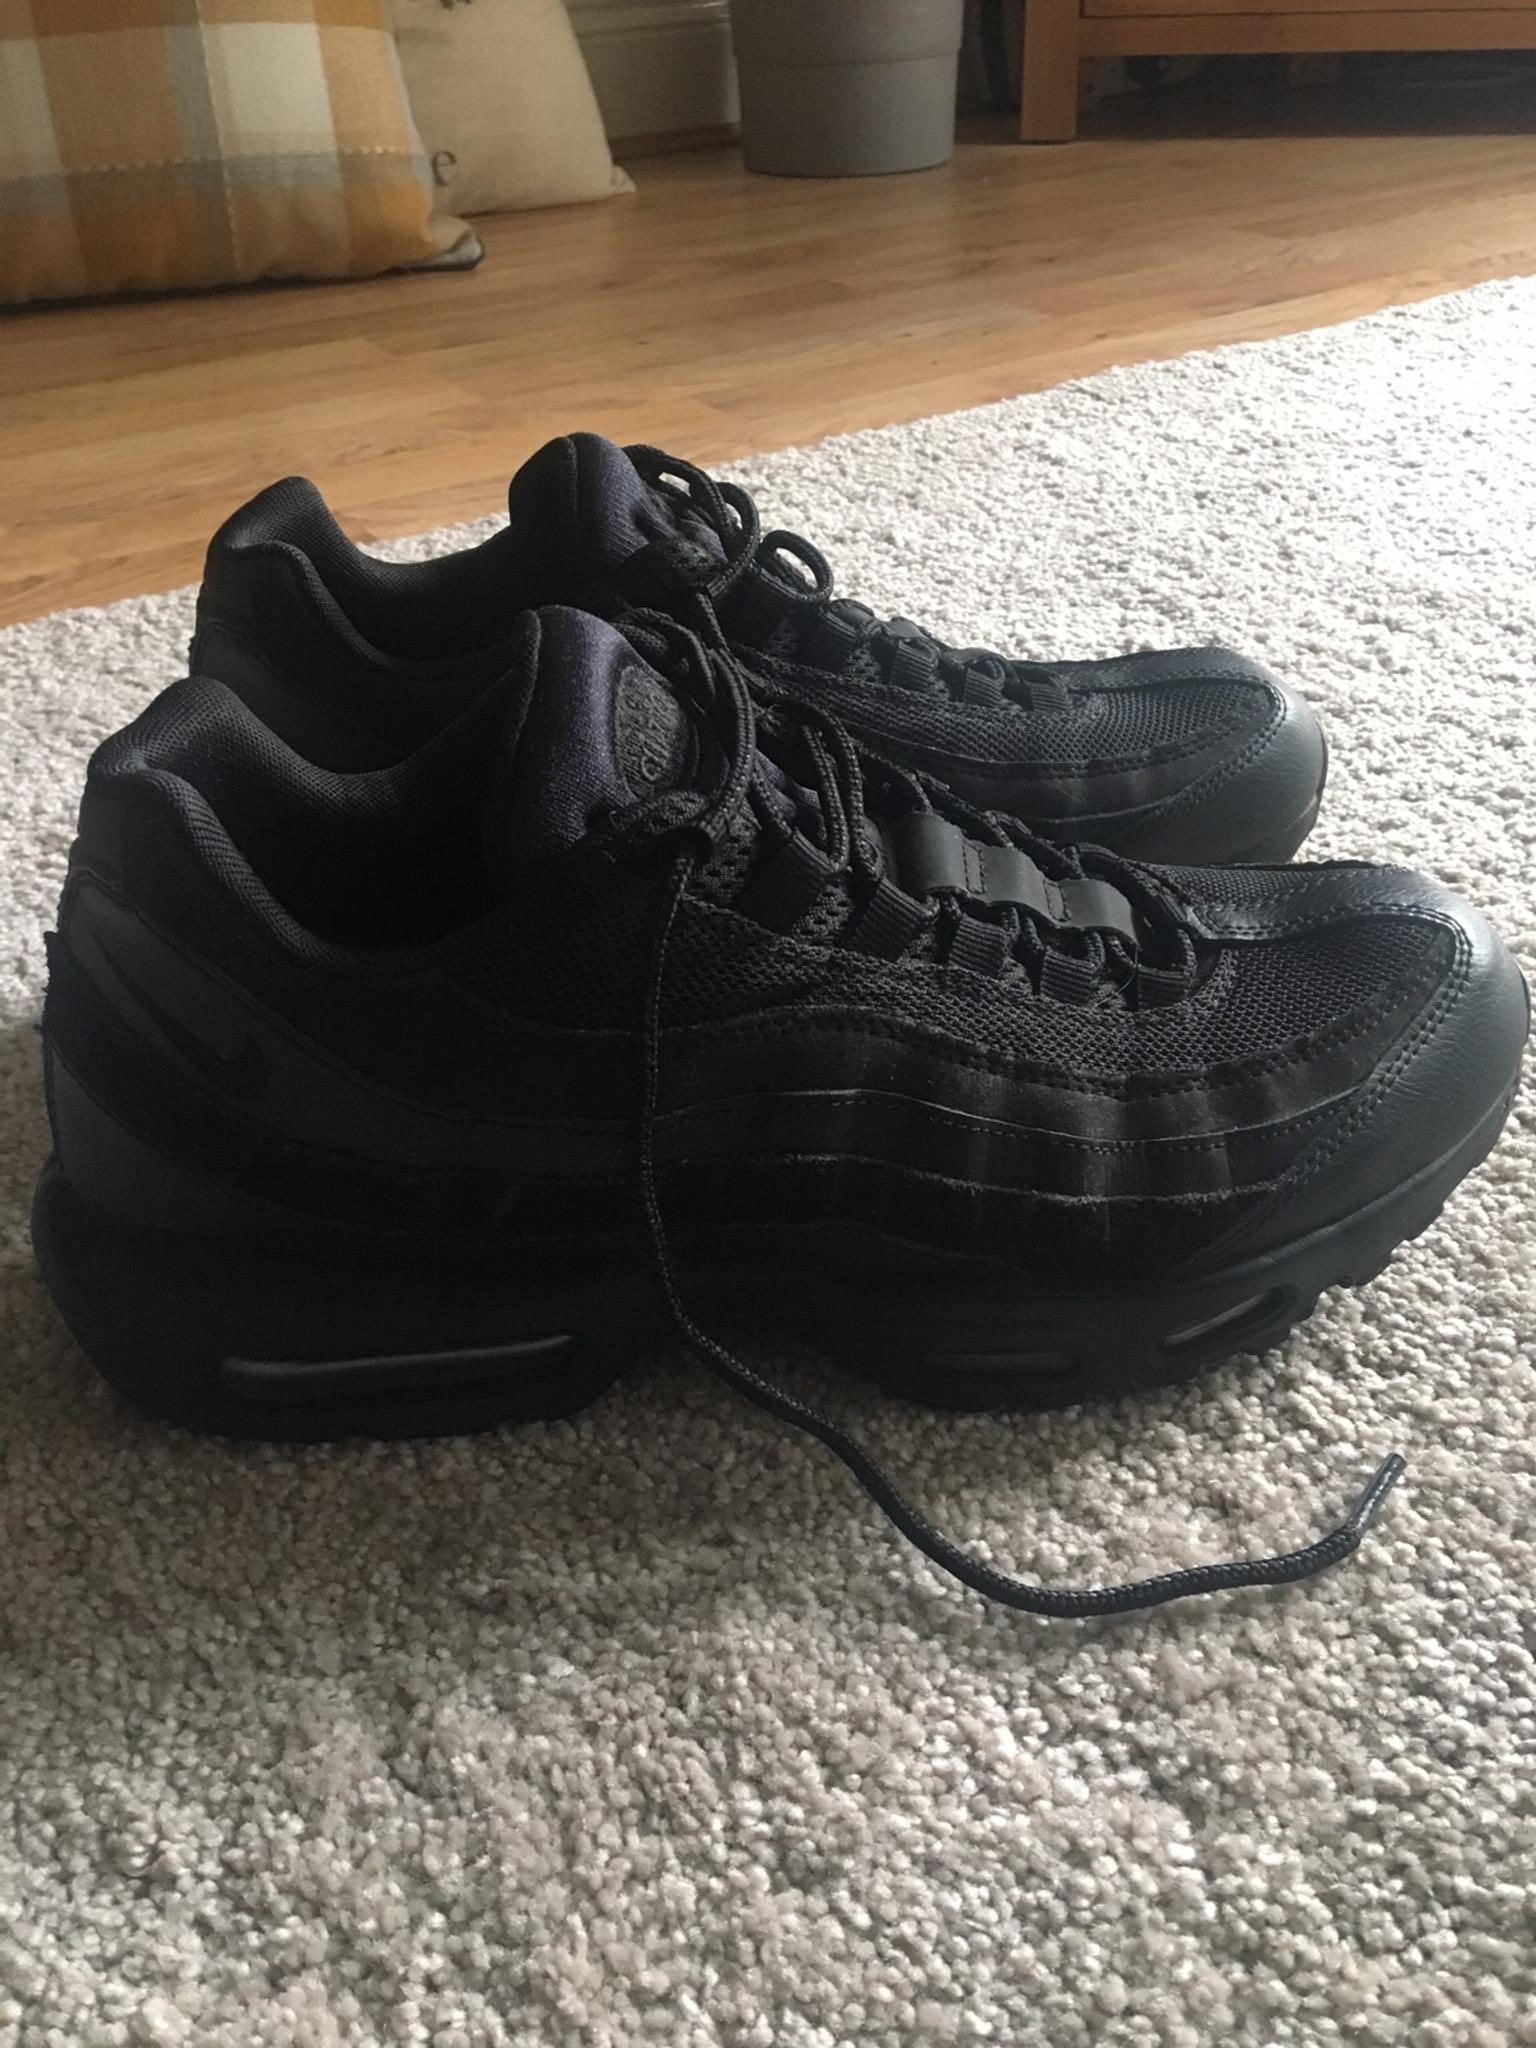 mens trainers size 9